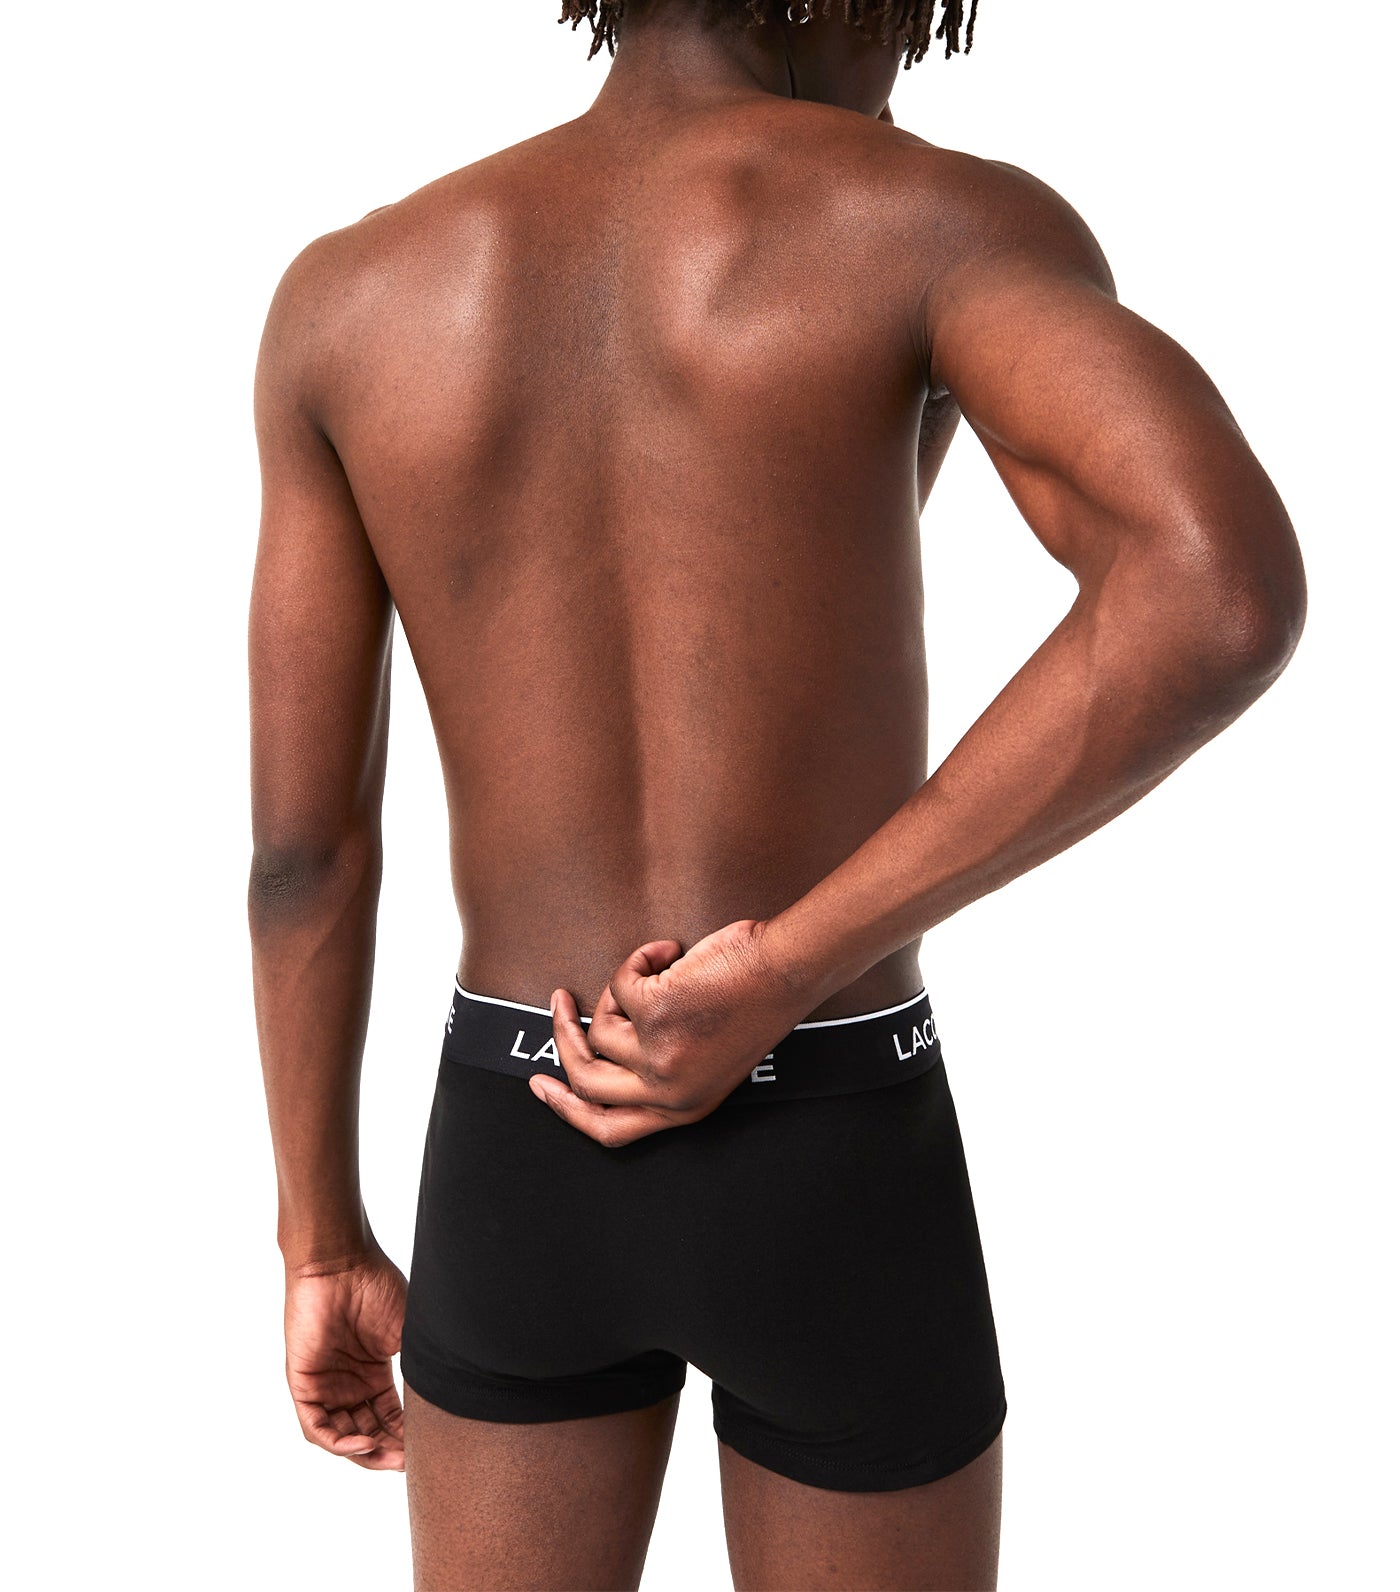 Pack Of 3 Casual Boxer Briefs Black